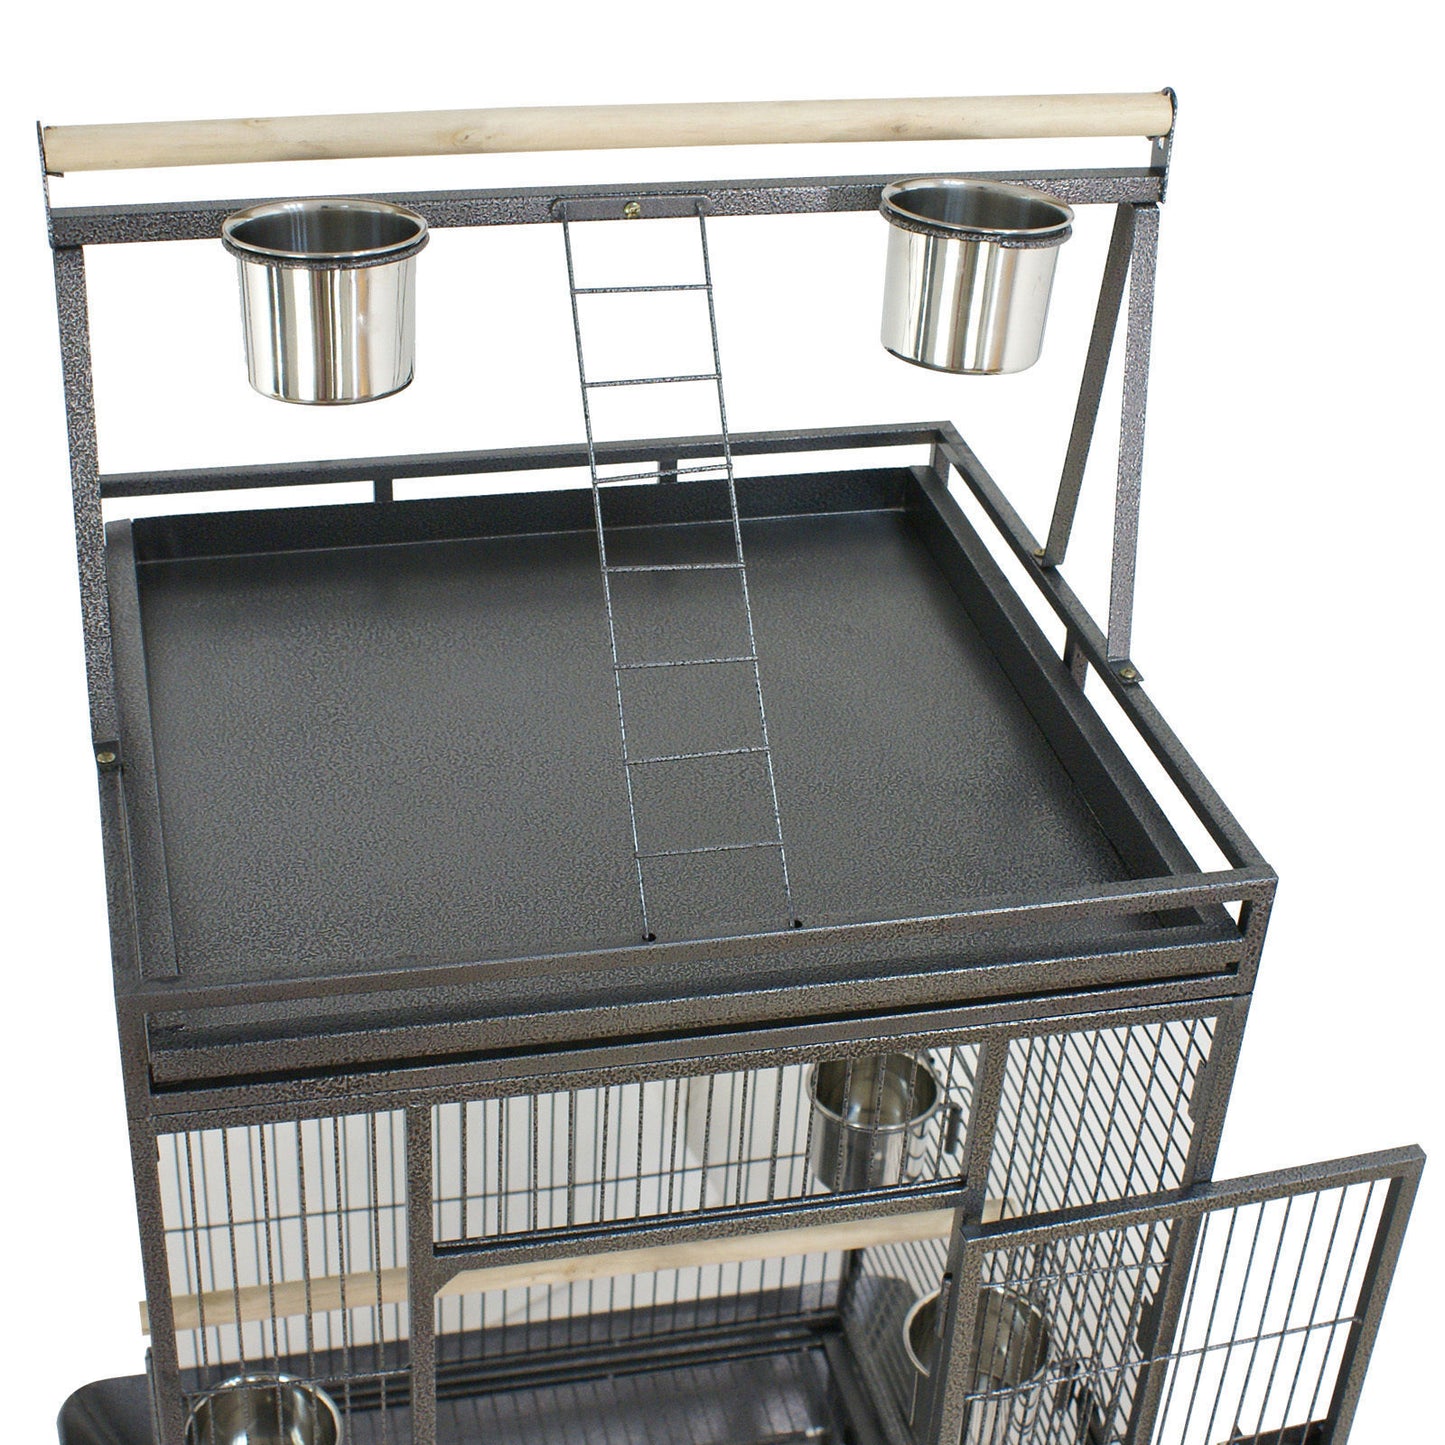 68" Large Bird Pet Cage Large Play Top Parrot Finch Cage Macaw Cockatoo 3 Doors